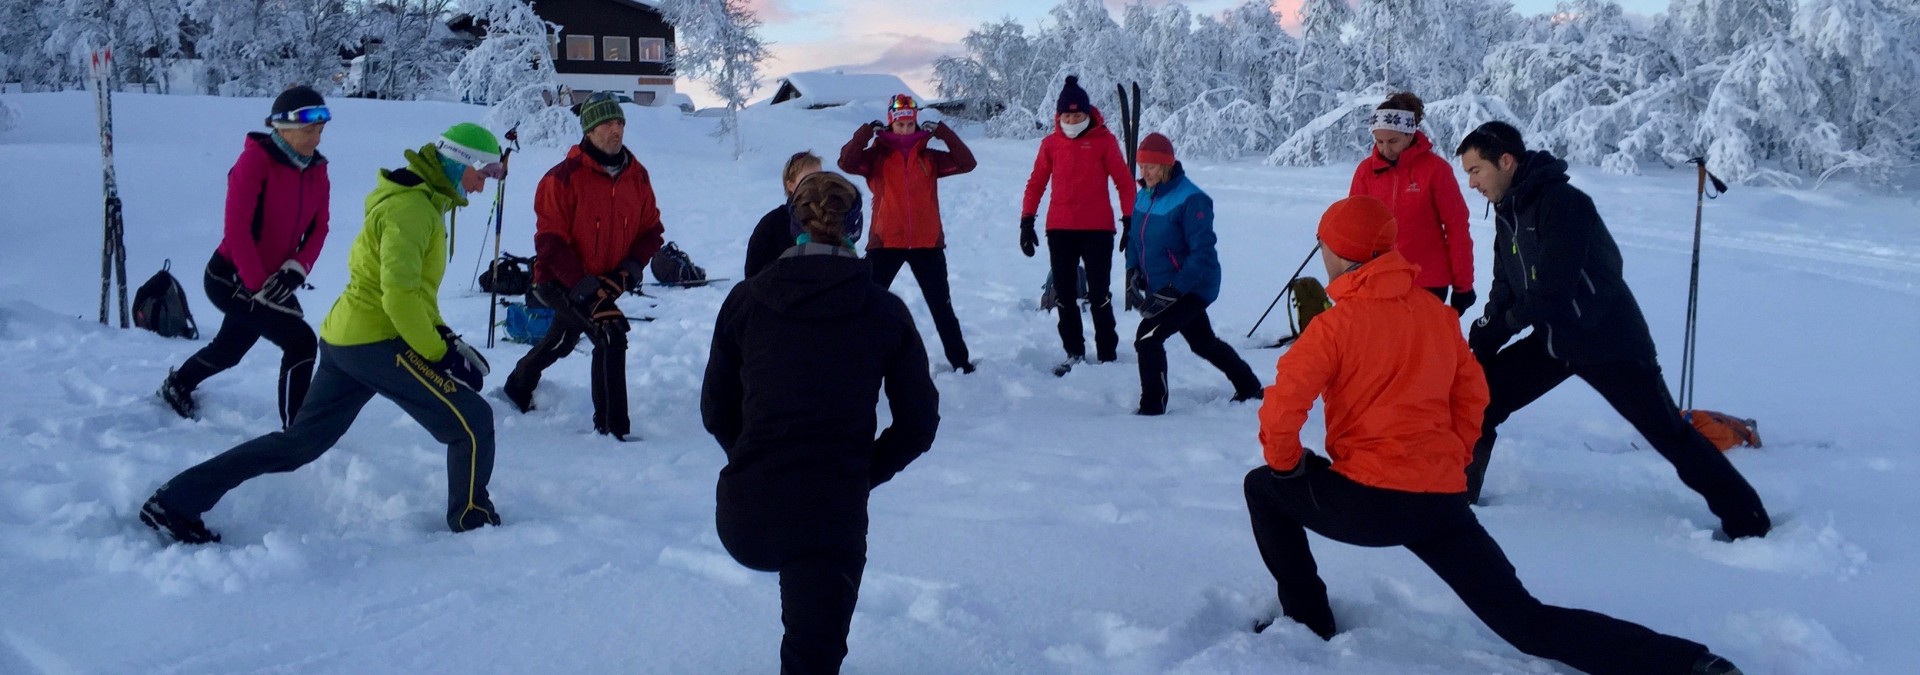 Morning warm up exercises to get those muscles moving. A vital part of preparing for your day on skis. 